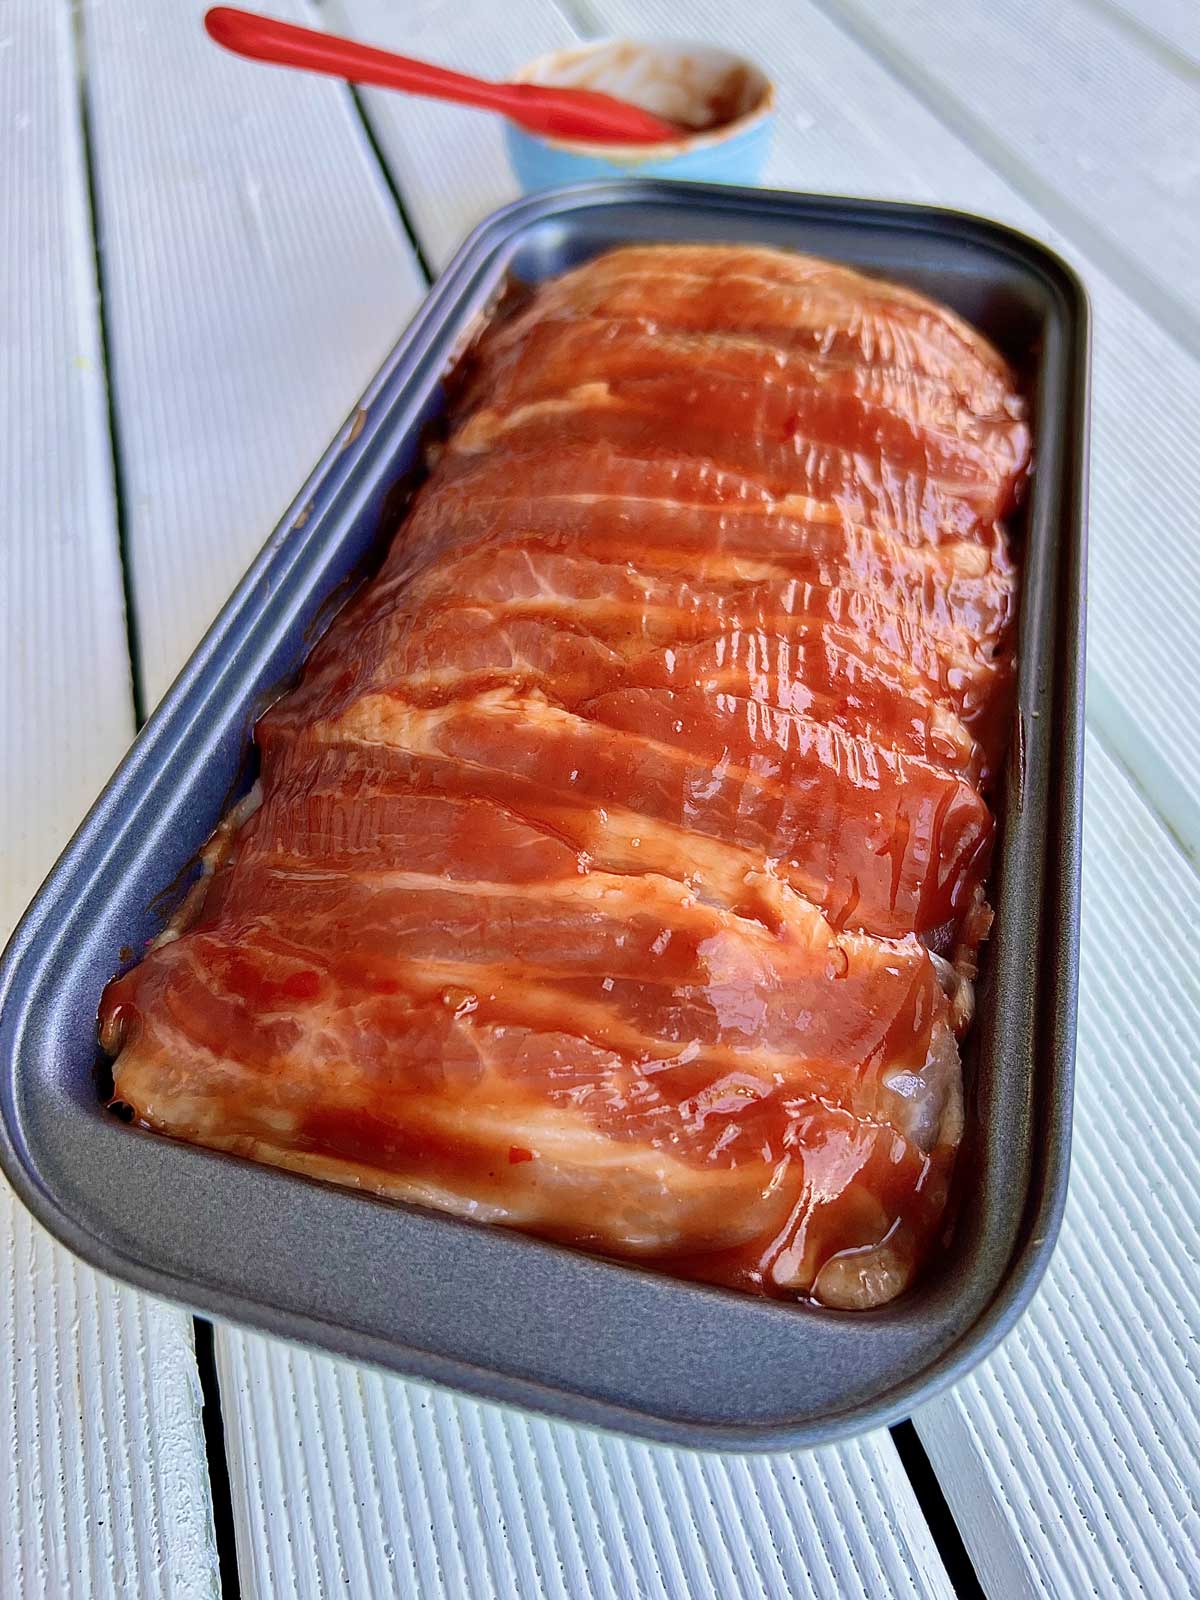 Meatloaf wrapped with bacon and brushed with homemade ketchup in a metallic tin ready to be cooked.